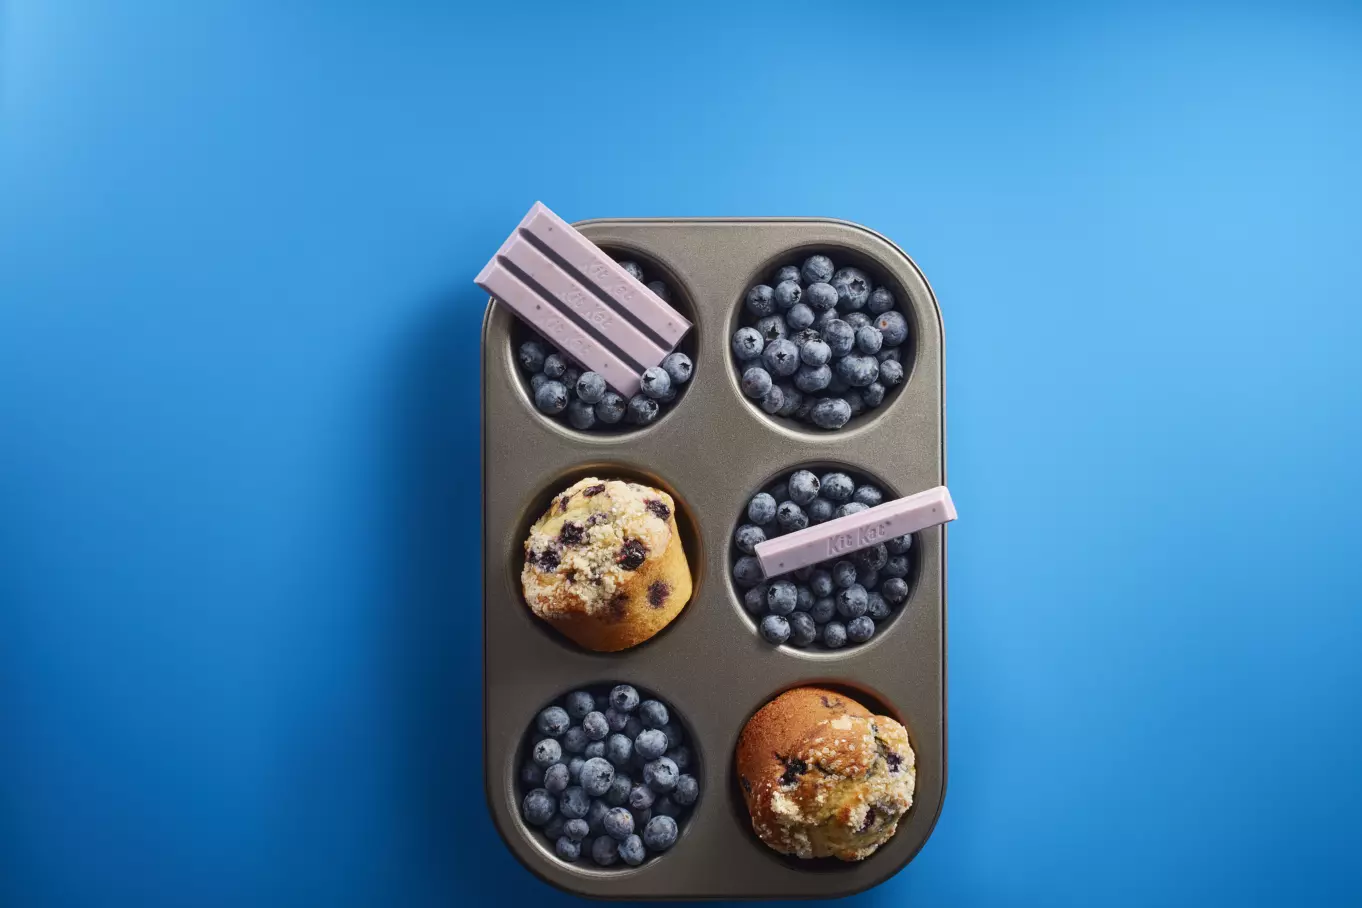 Unwrapped candy bars inside muffin tin with blueberries and muffins